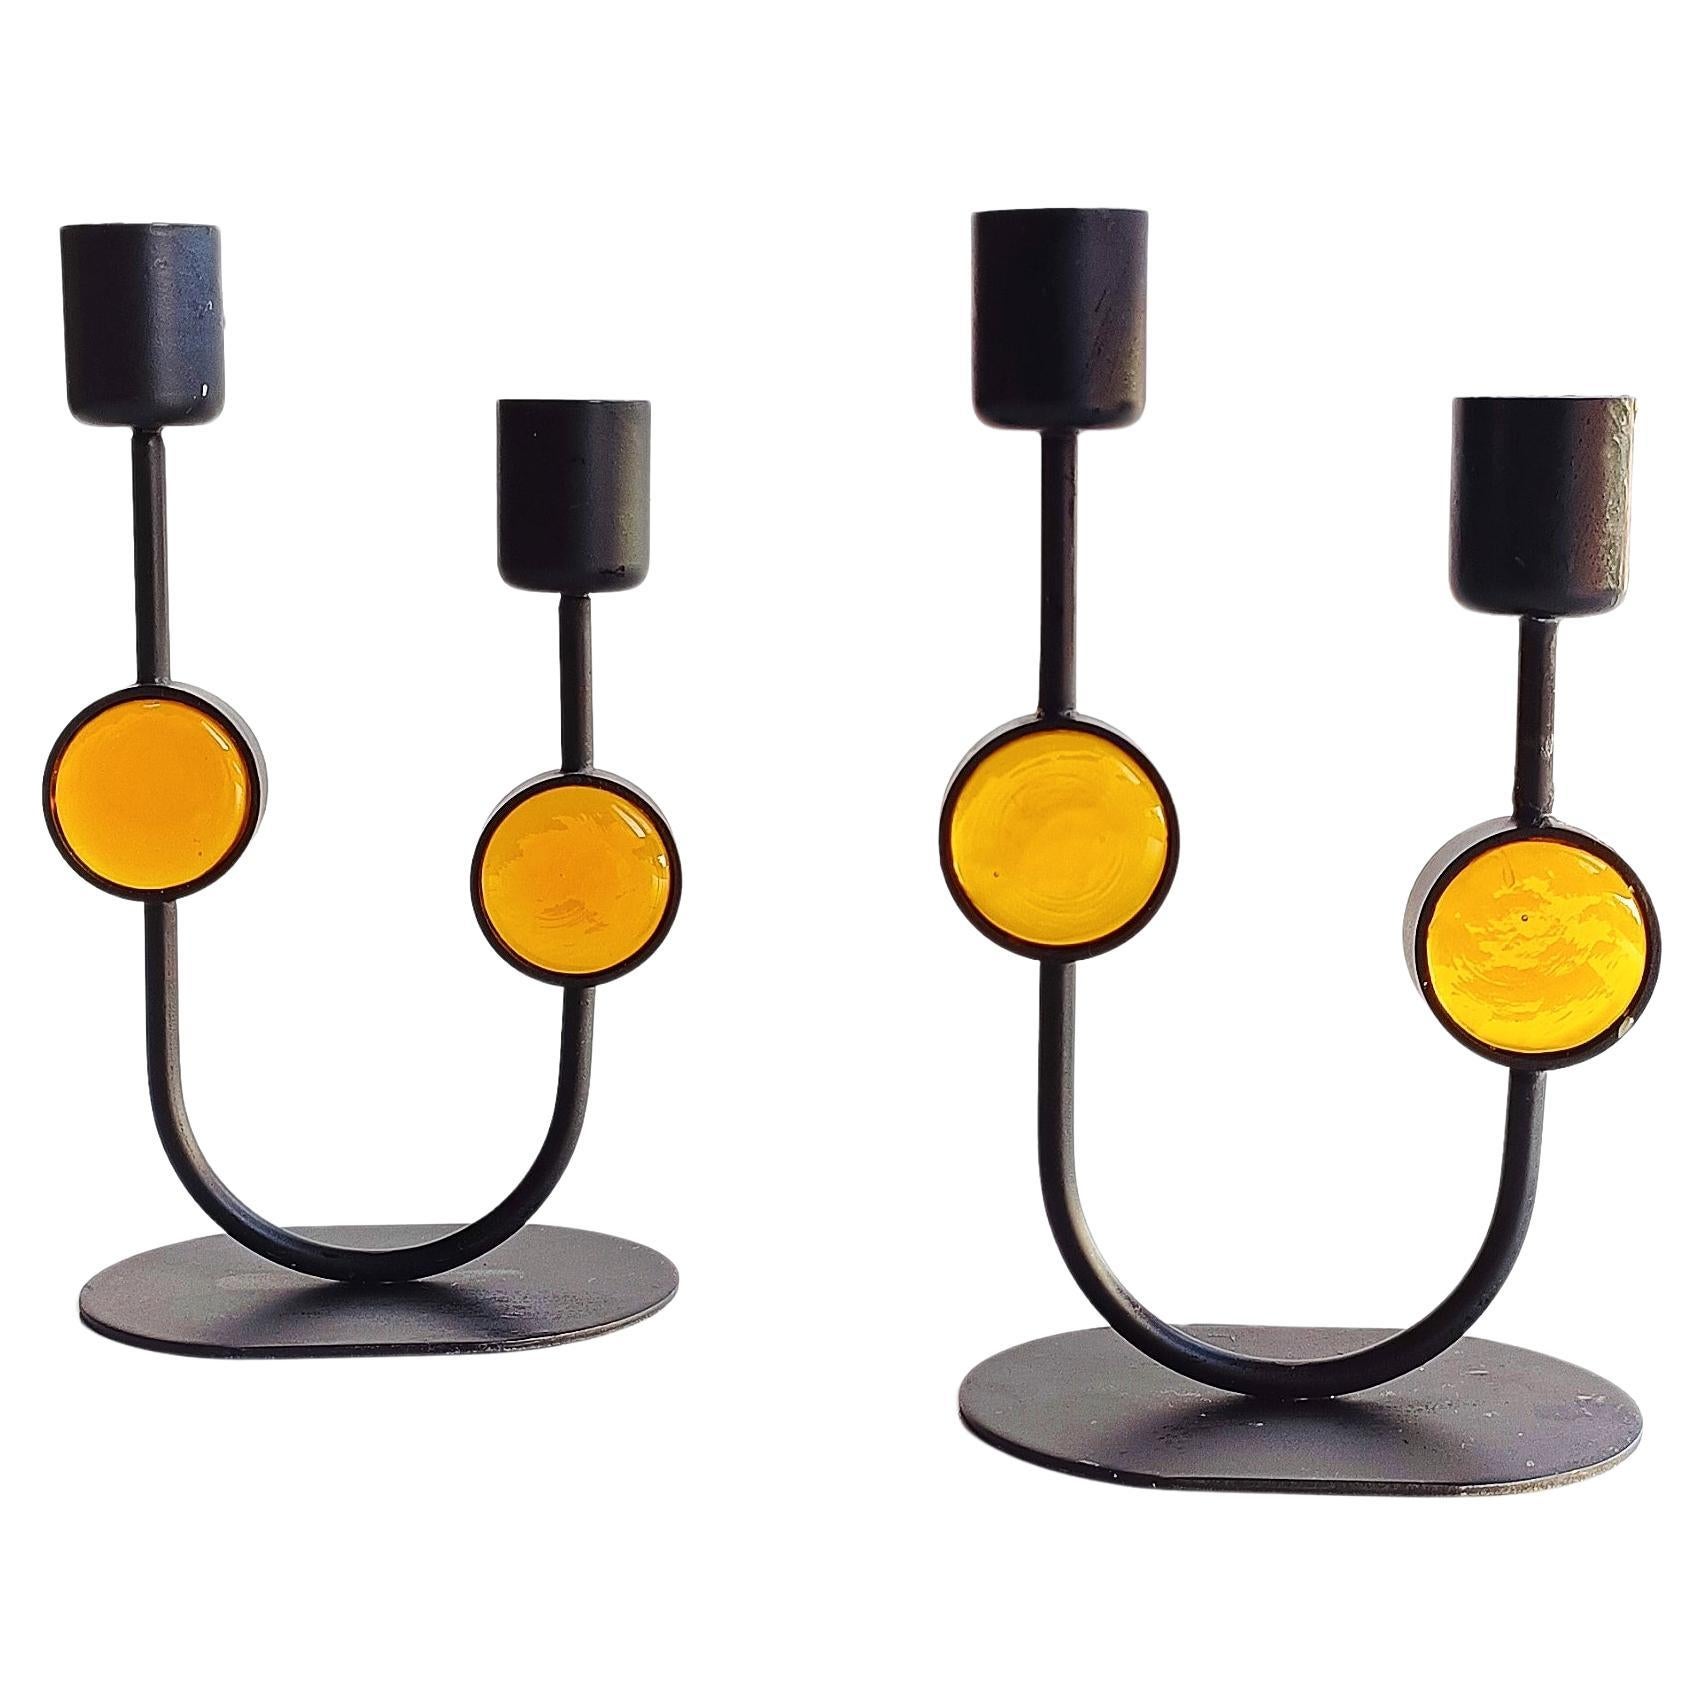 Swedish Scandinavian Modern Gunnar Under for Ystad Metal Signed Pair of Candle Holders For Sale